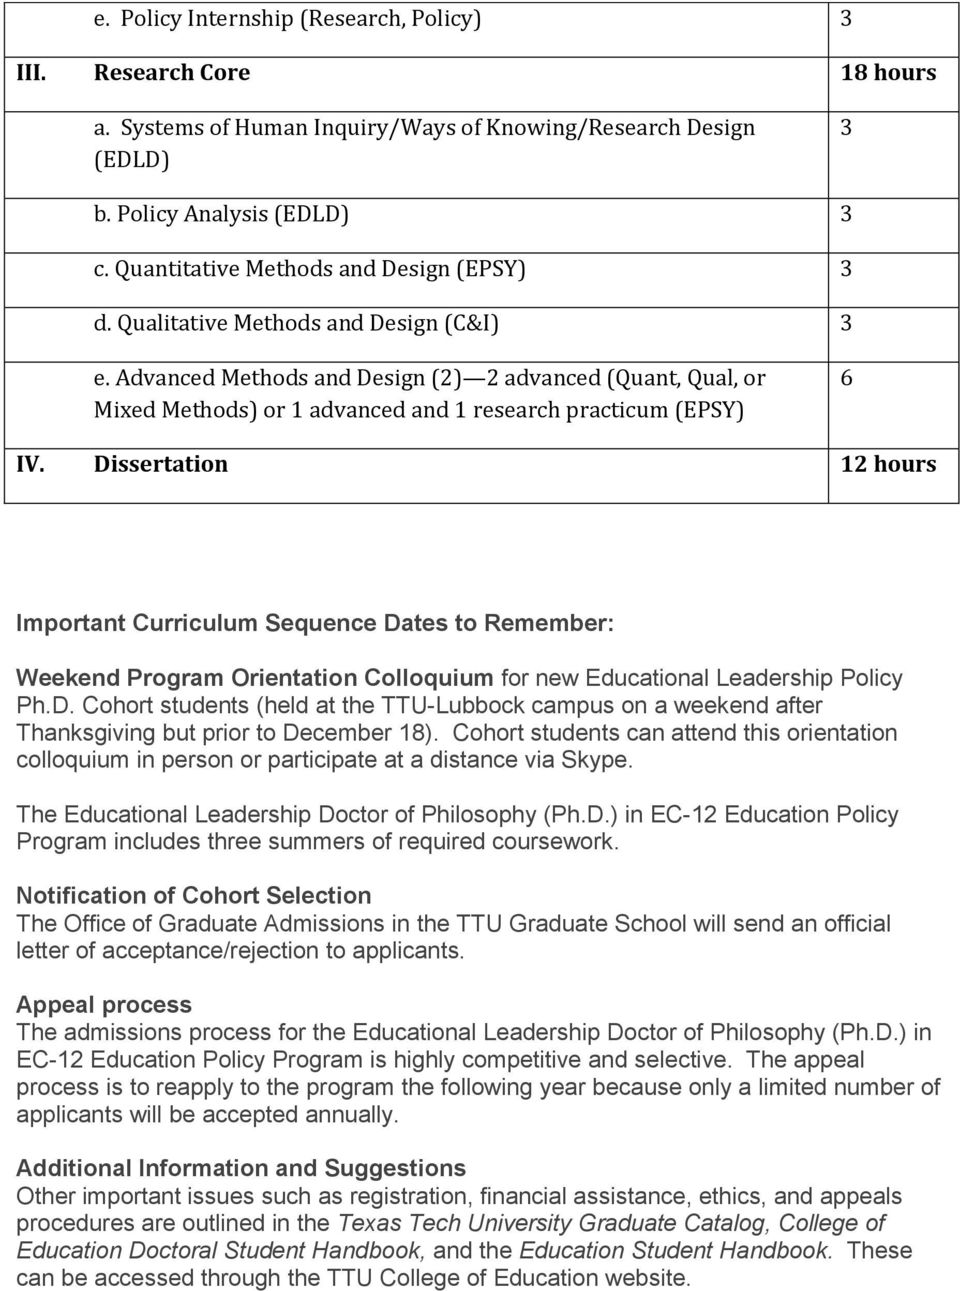 Important Curriculum Sequence Dates to Remember: Weekend Program Orientation Colloquium for new Educational Leadership Policy PhD Cohort students (held at the TTU-Lubbock campus on a weekend after